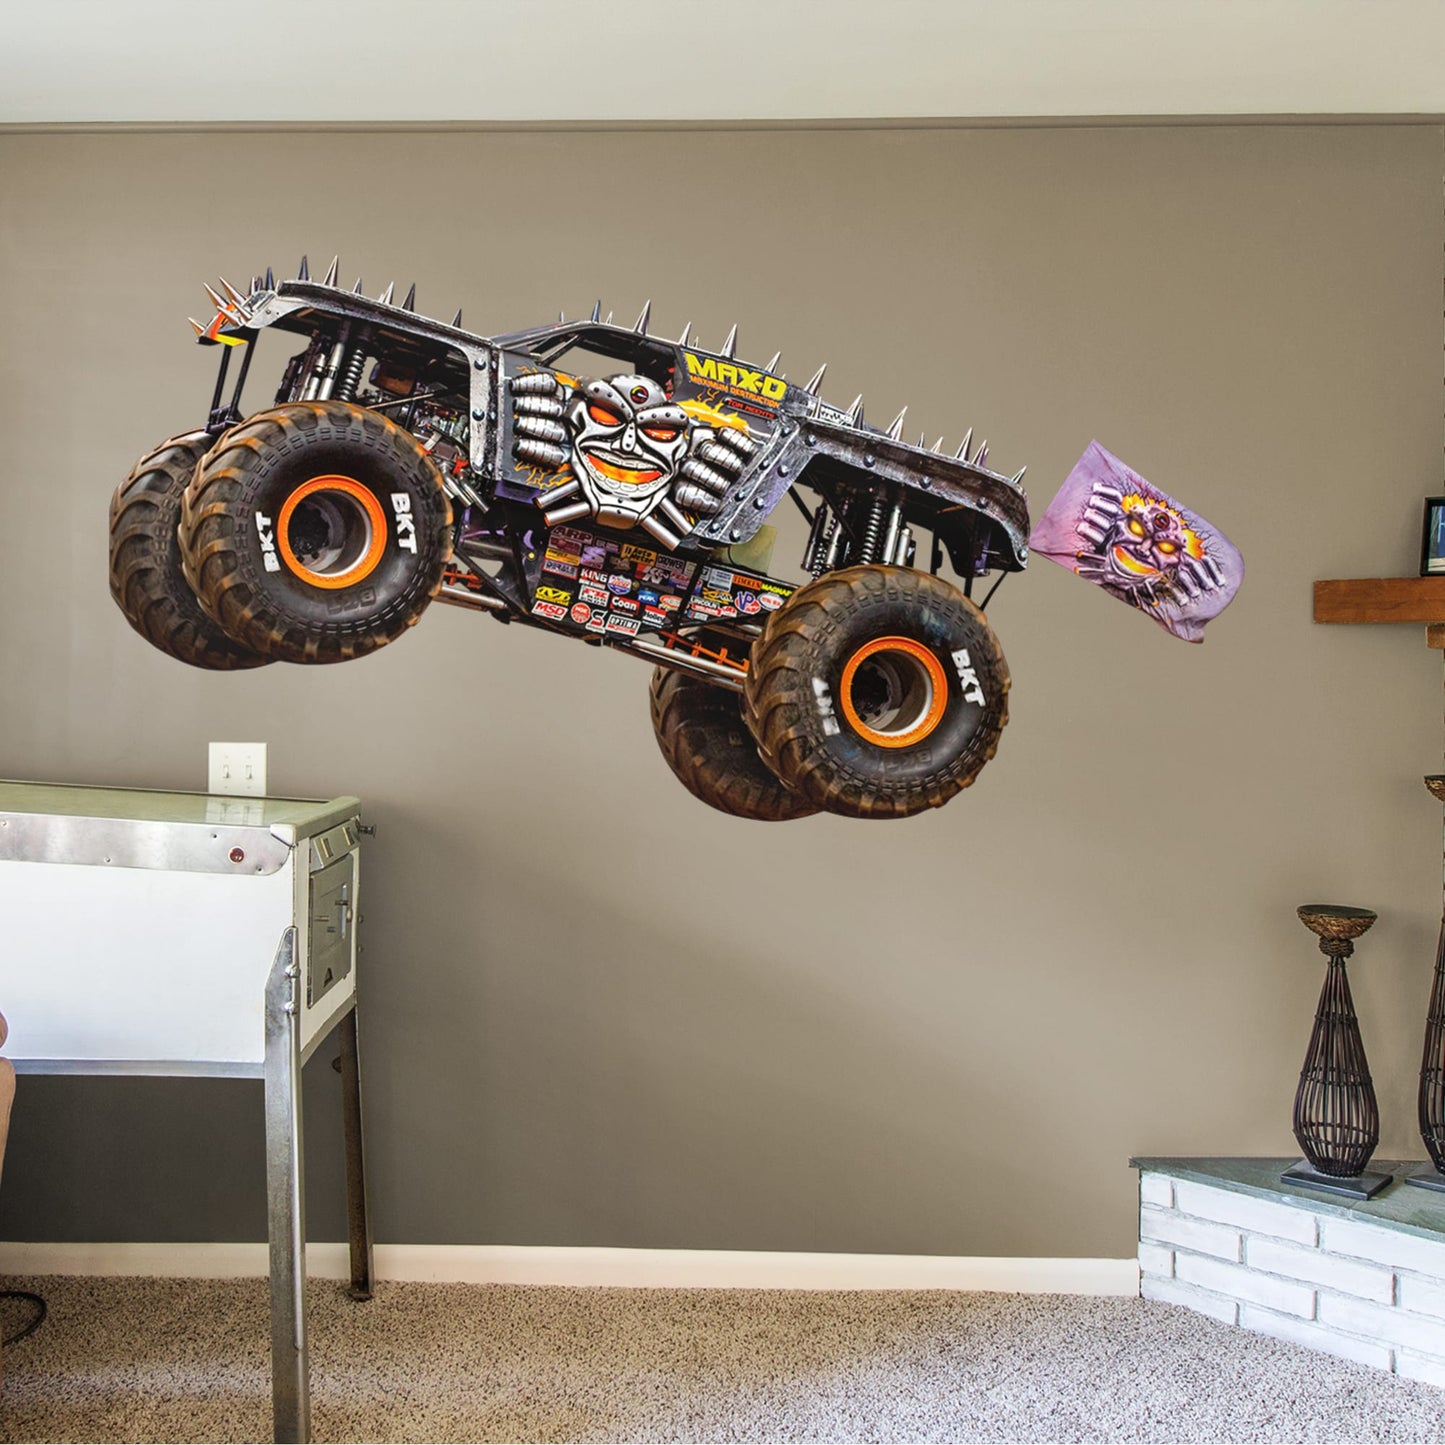 Max-D         - Officially Licensed Monster Jam Removable     Adhesive Decal